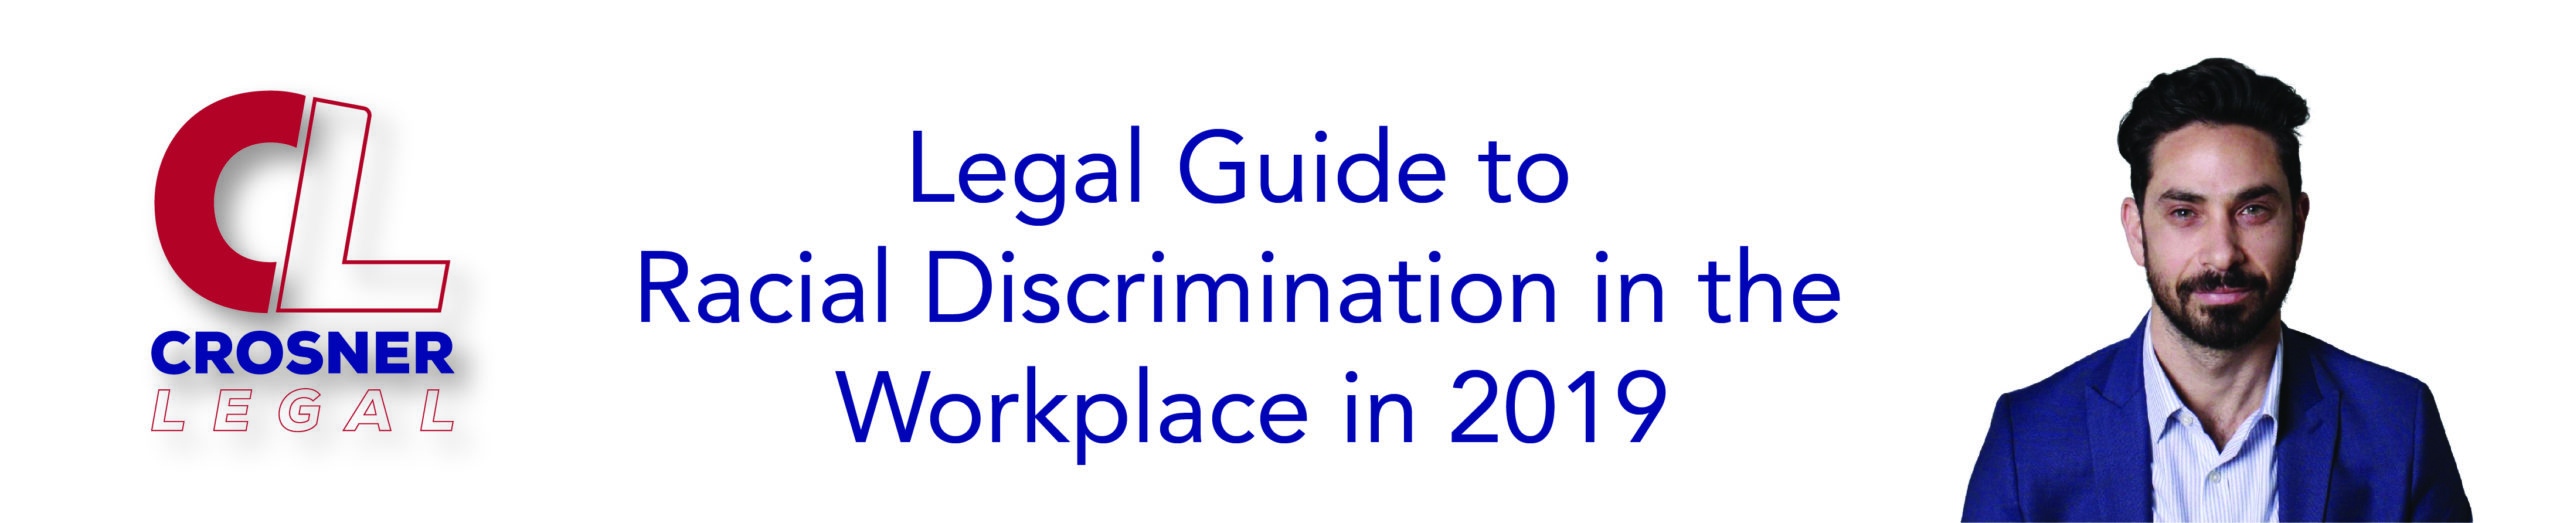 Legal Guide to Racial Discrimination in the Workplace in 2019